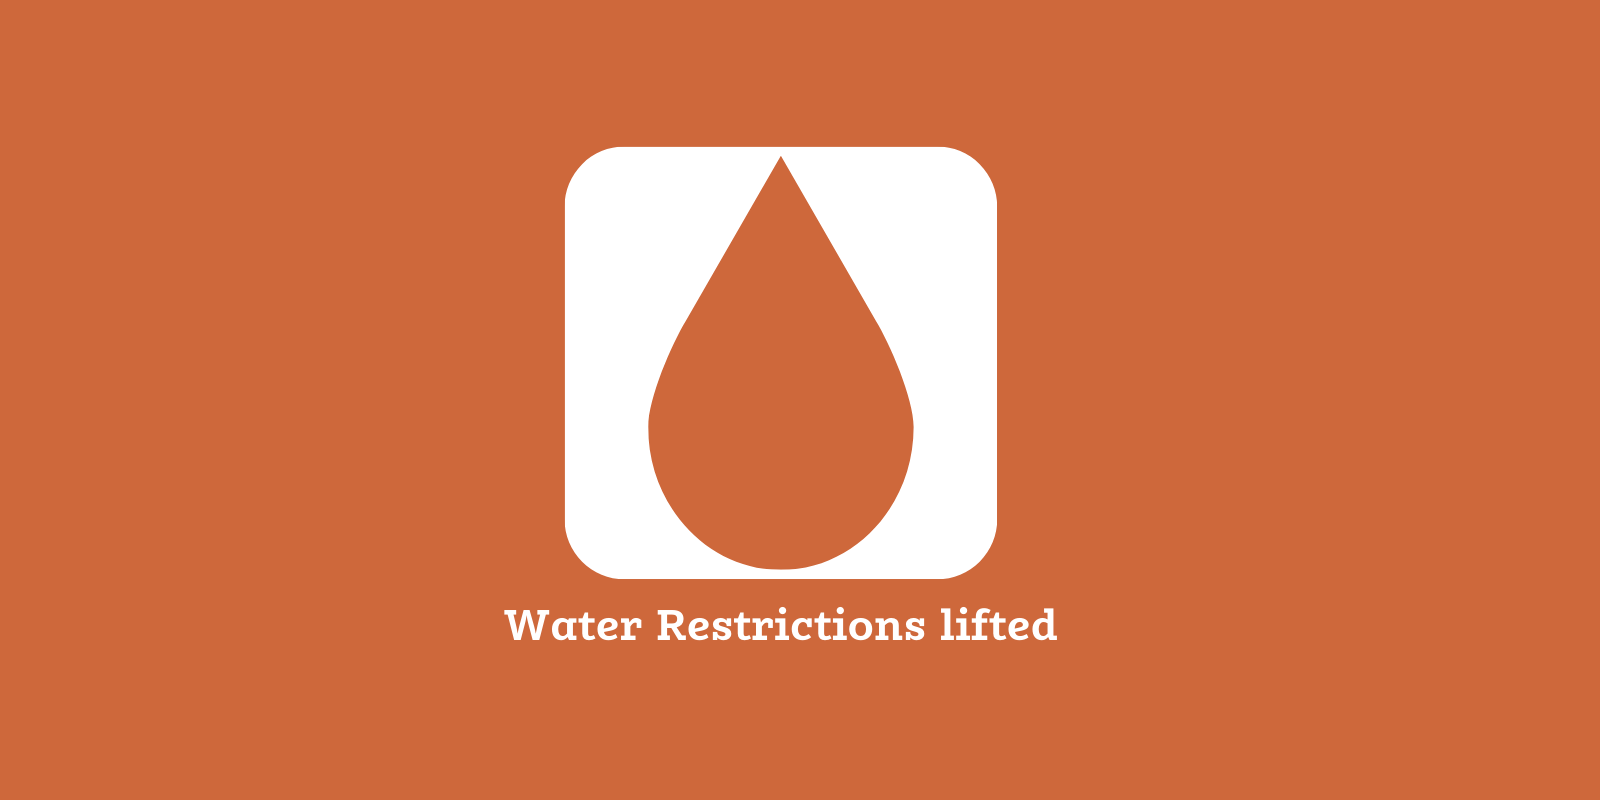 Water restrictions lifted  banner image